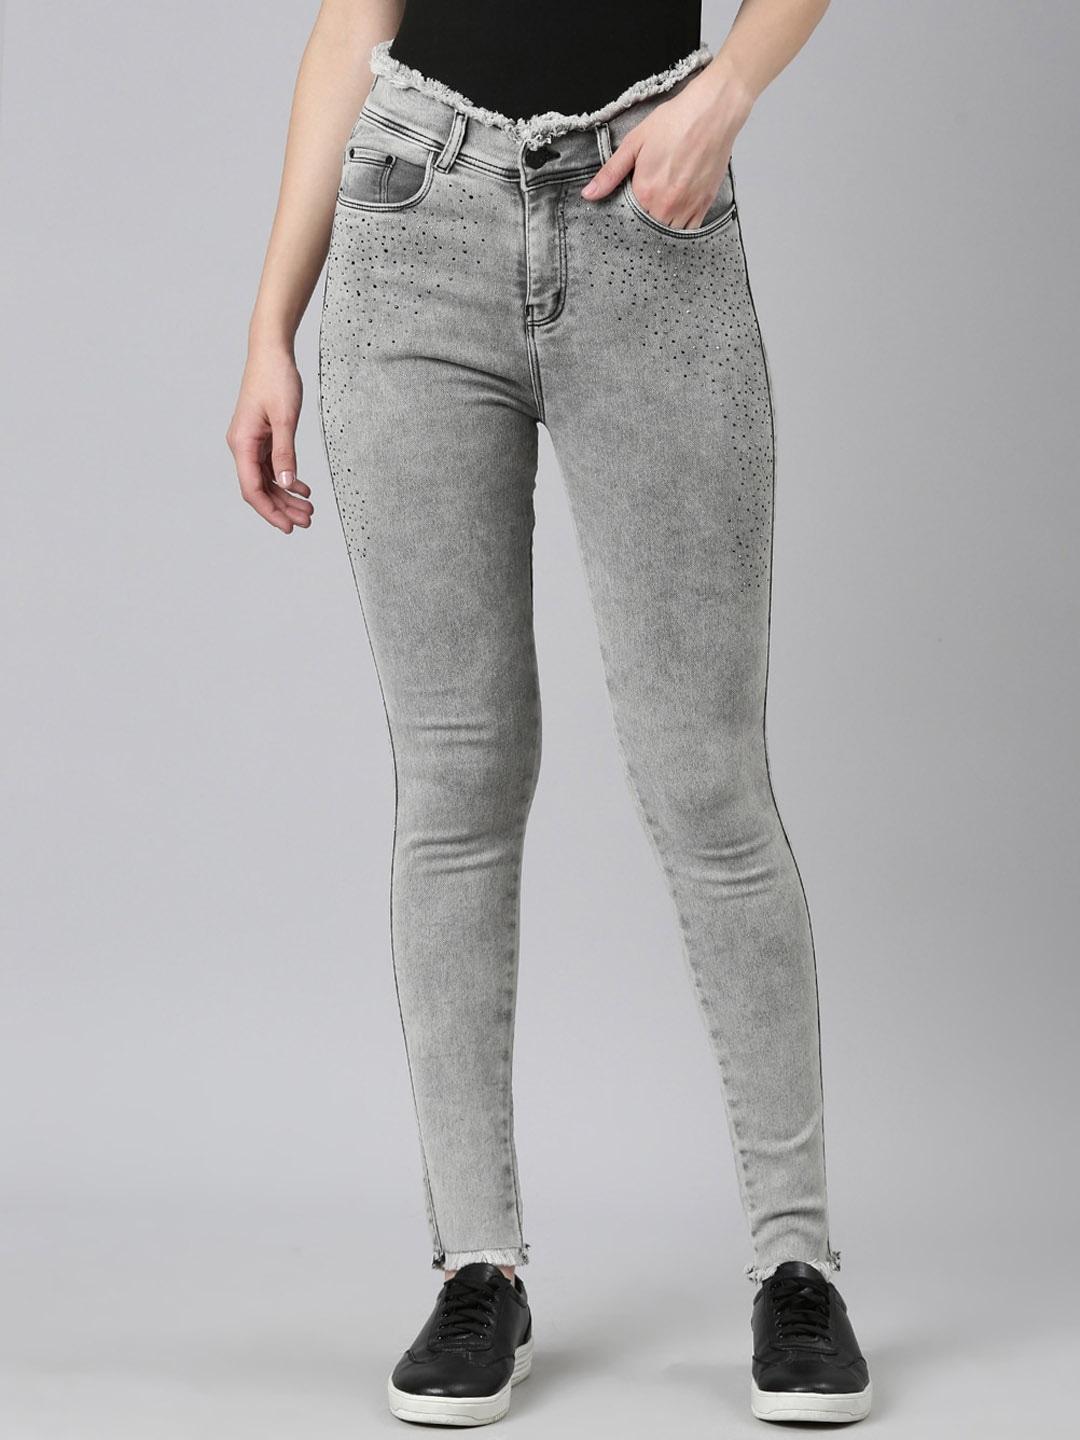 showoff-women-jean-skinny-fit-heavy-fade-acid-wash-stretchable-jeans